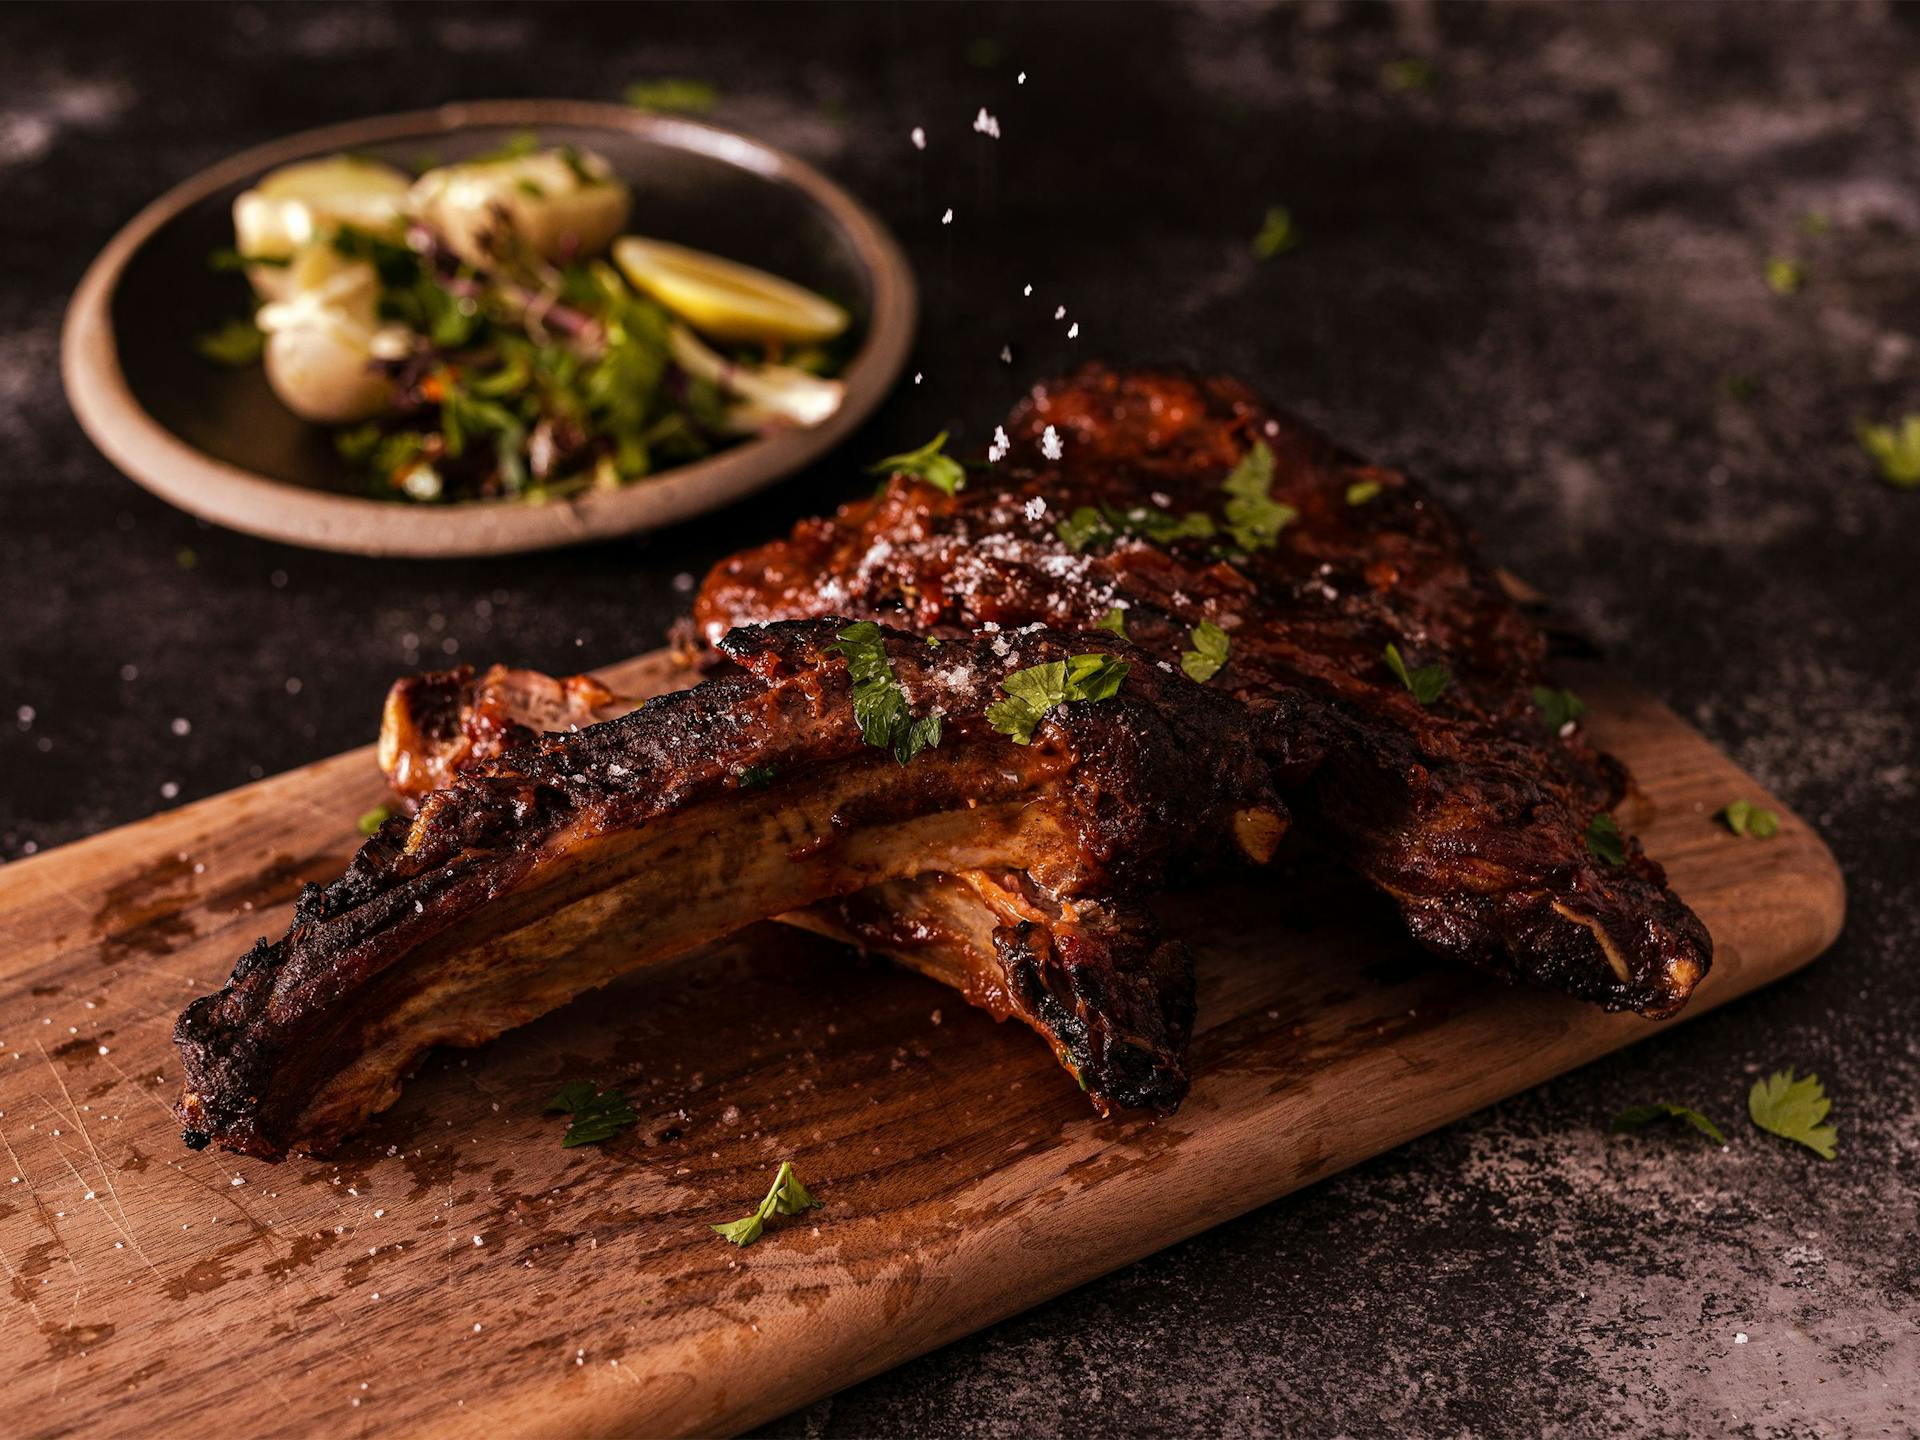 Pork ribs on a wooden board with salt sprinkled on top